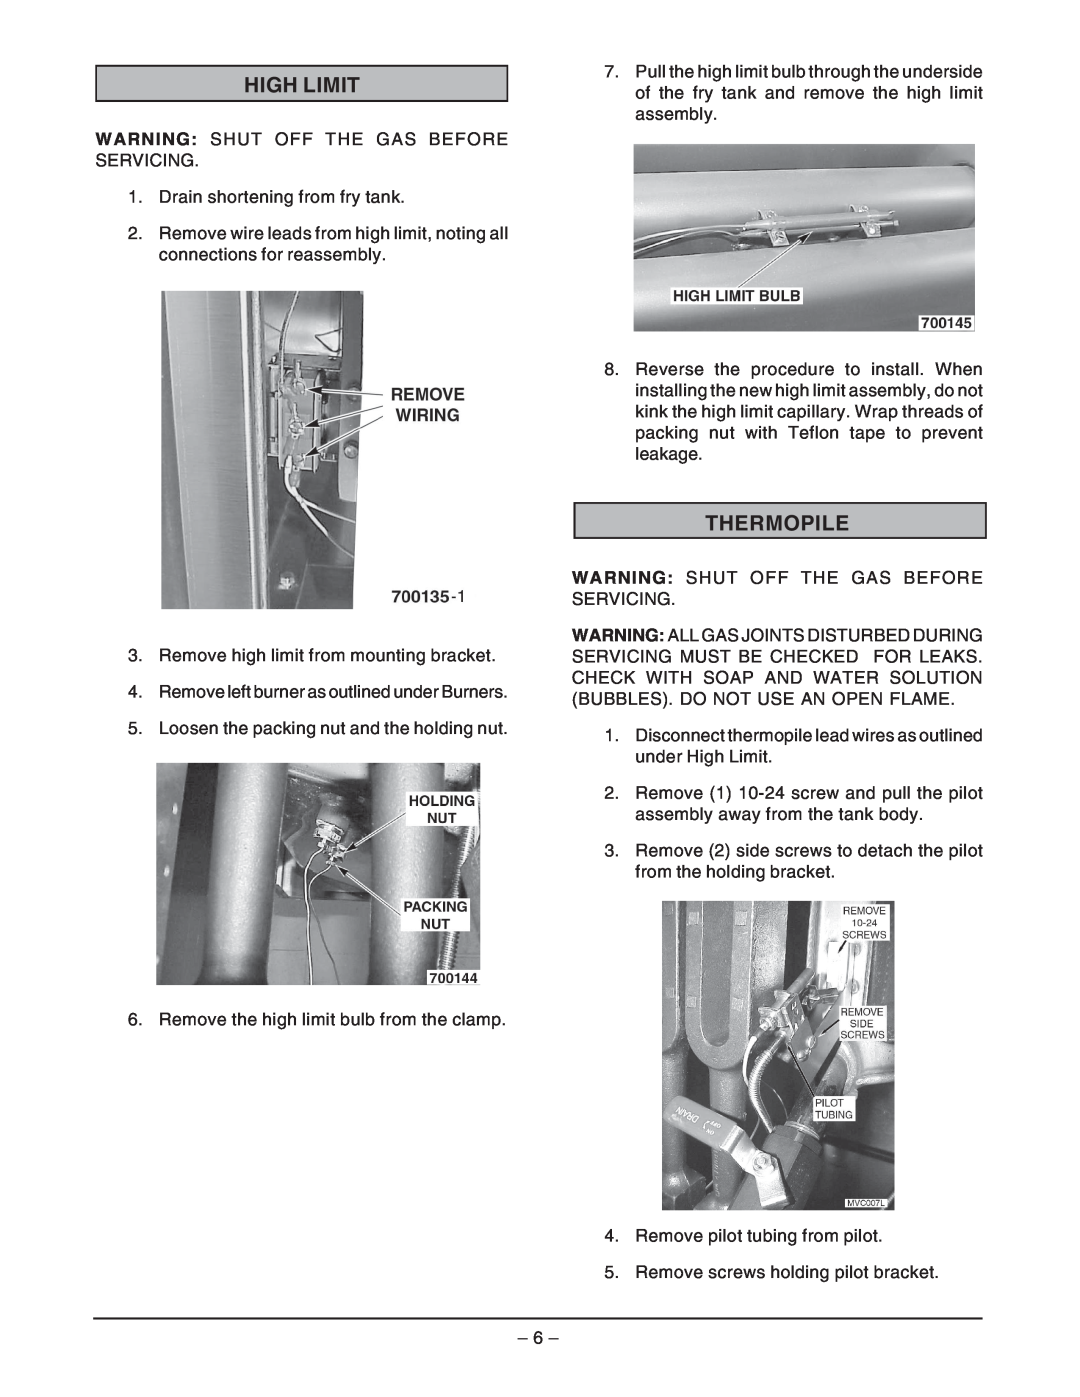 Vulcan-Hart GHF91G ML-135503, GHF90G ML-135504 service manual High Limit, Thermopile 